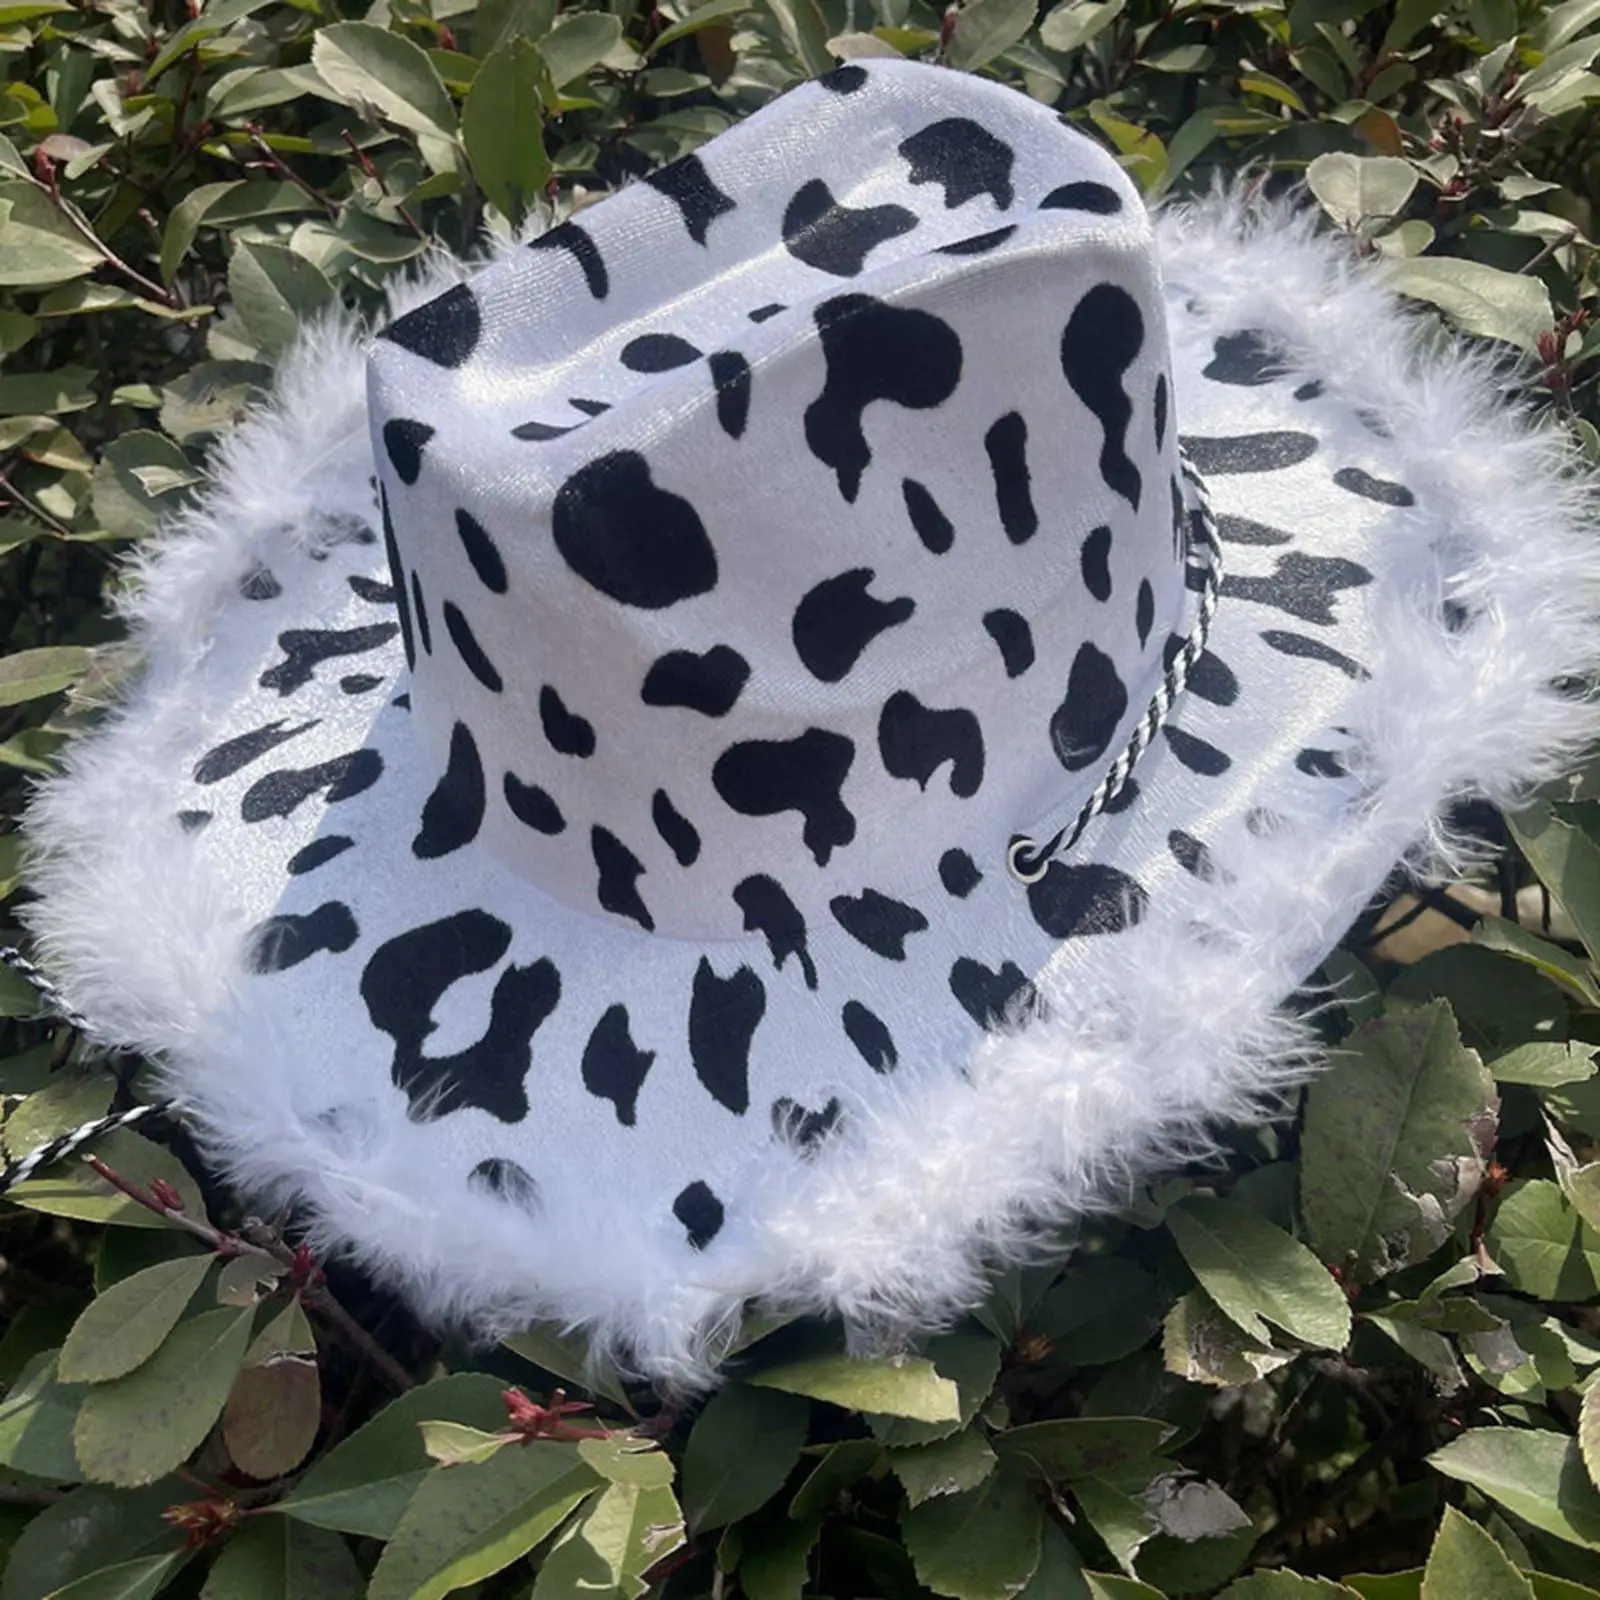 Western Cowboy Hat Sun Hats with Lanyard Dress up Breathable Big Brim Cow Hat for Unisex Adults Men Women Party Holiday Outdoor